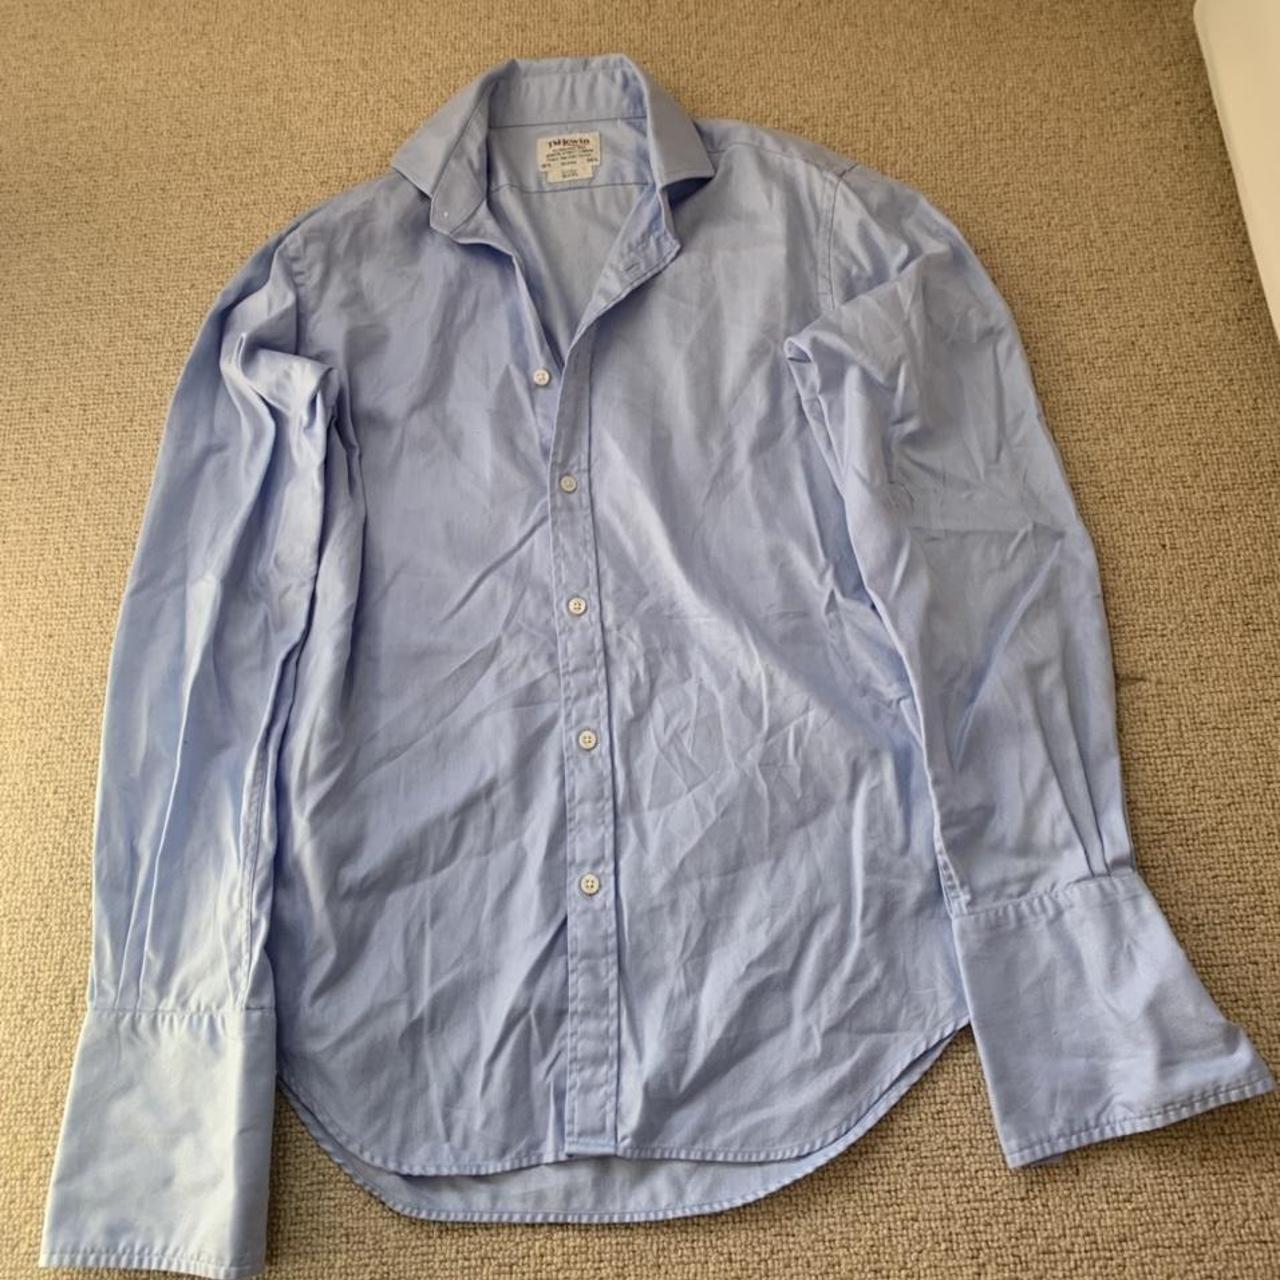 & Other Stories Men's Blue and White Shirt | Depop